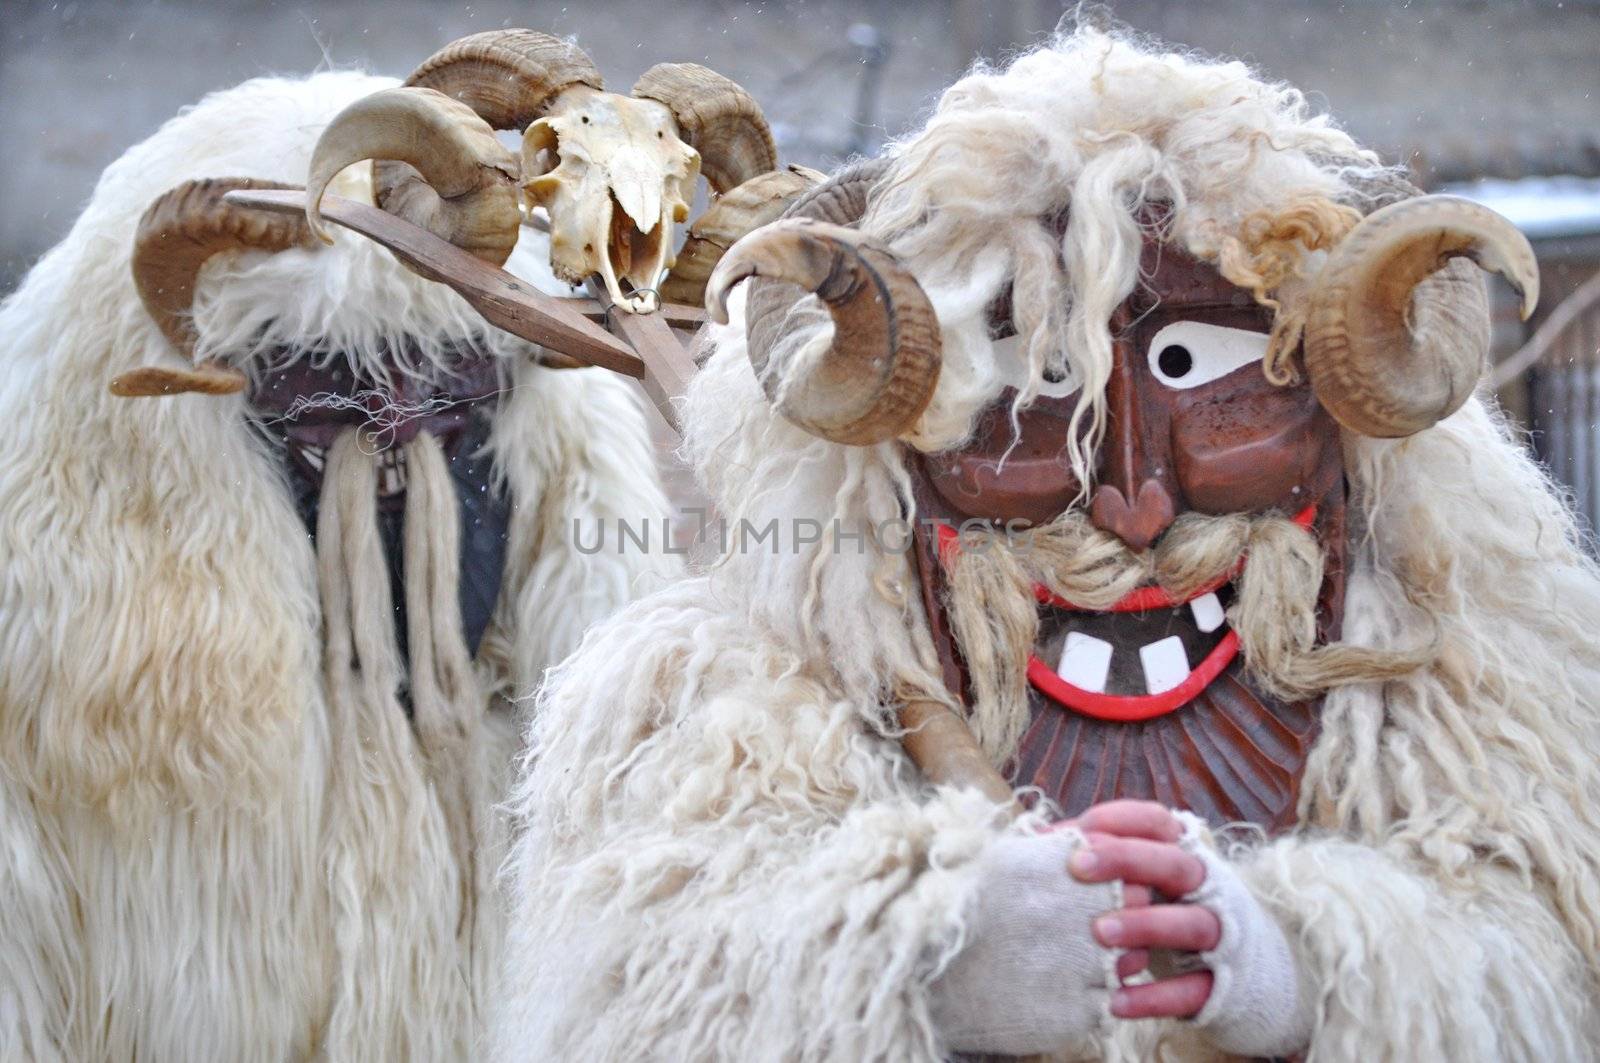 MOHACS, HUNGARY - MARCH 10: Unidentified people in mask at the M by anderm